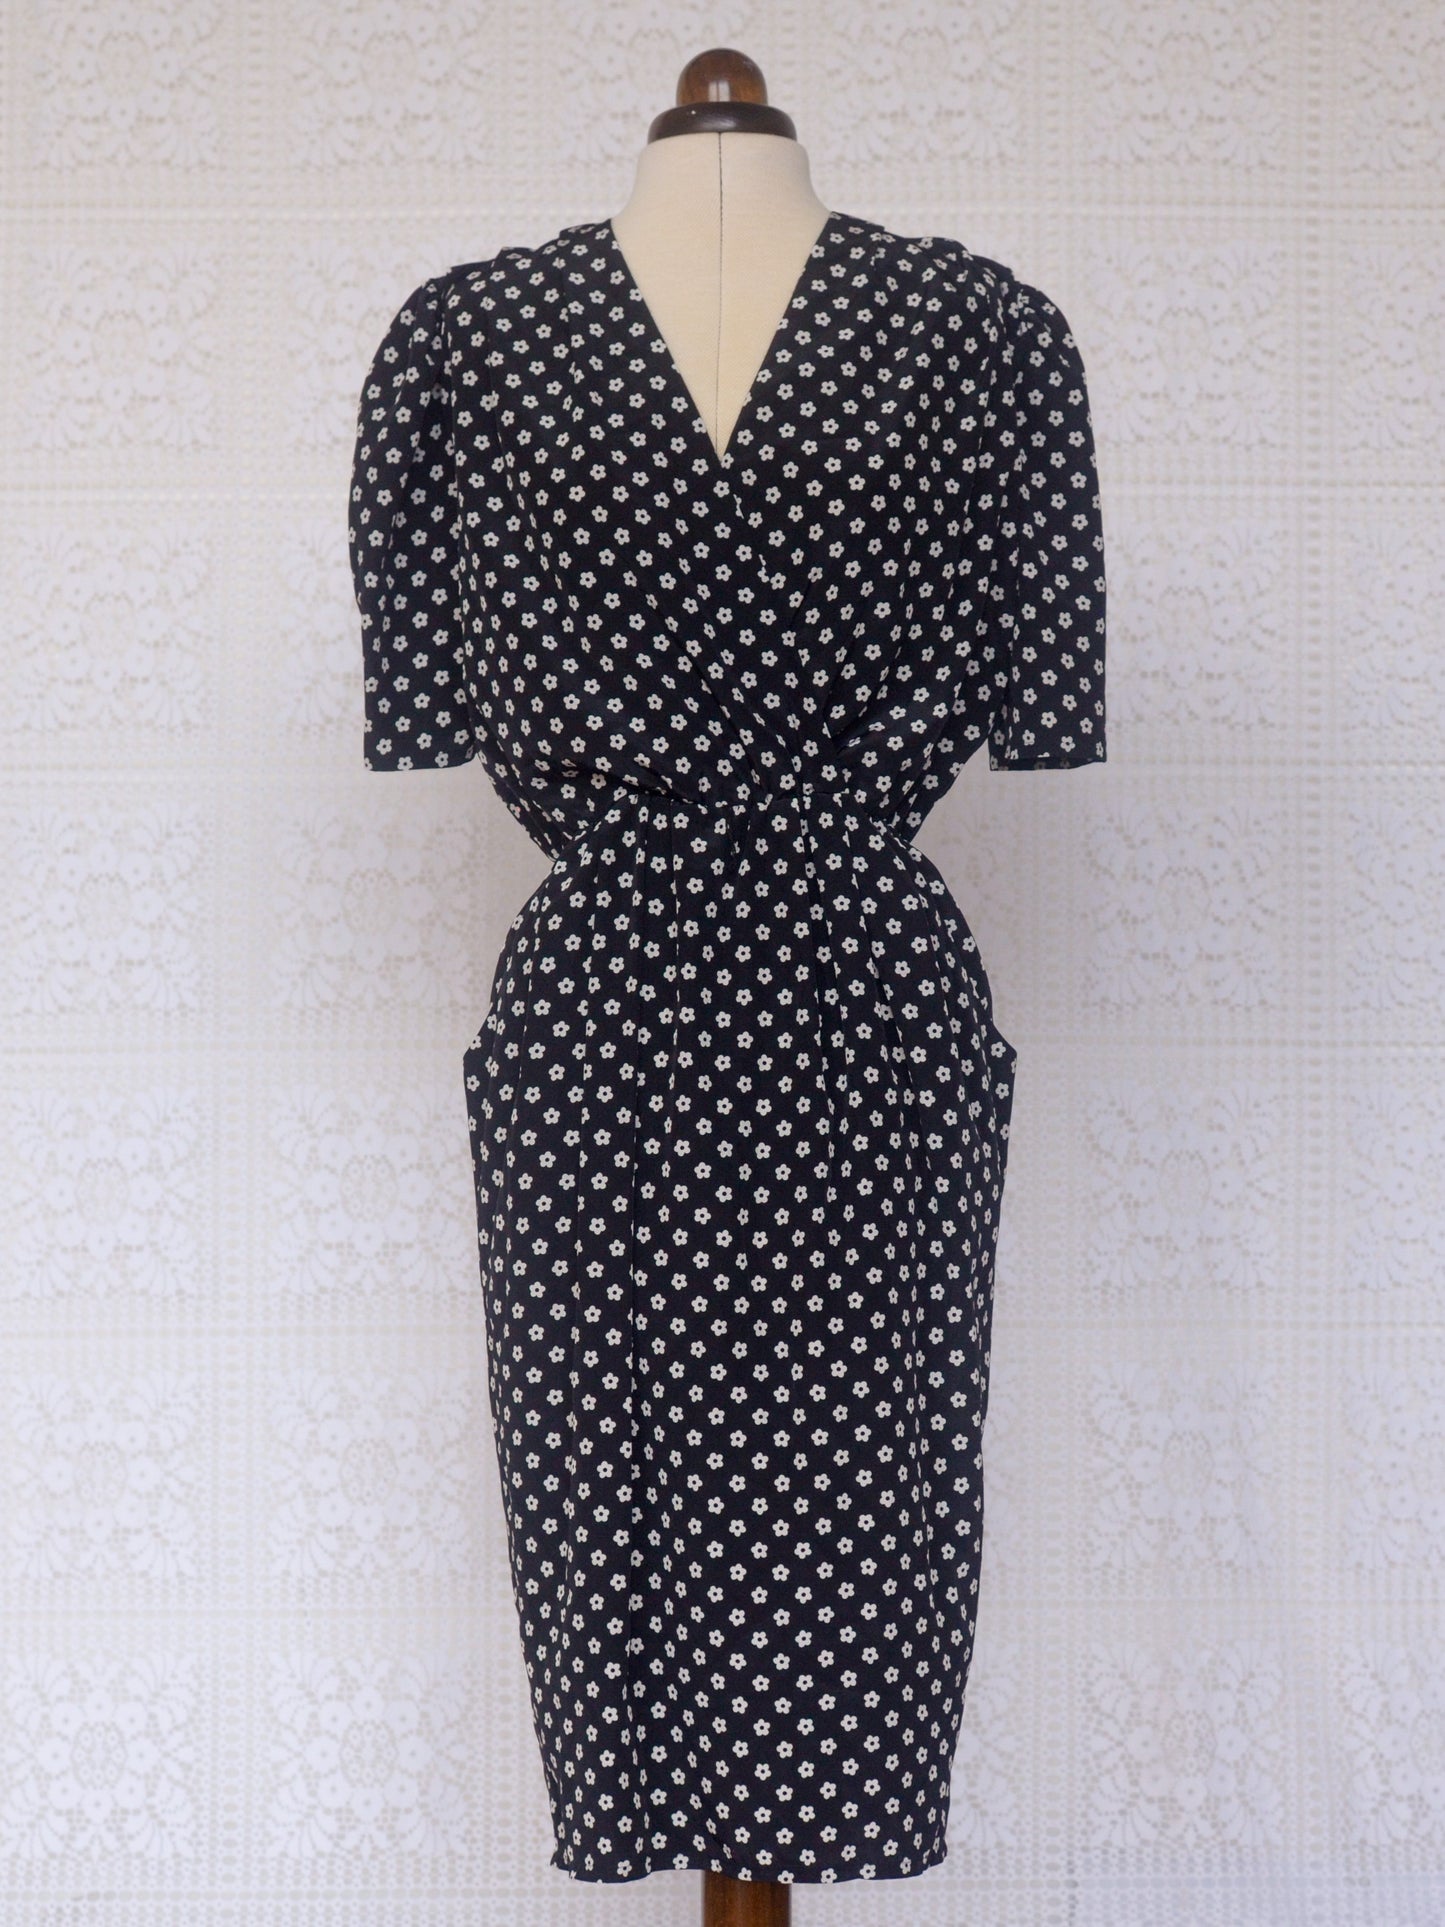 1980s C&A black and white daisy floral pattern pencil skirt dress